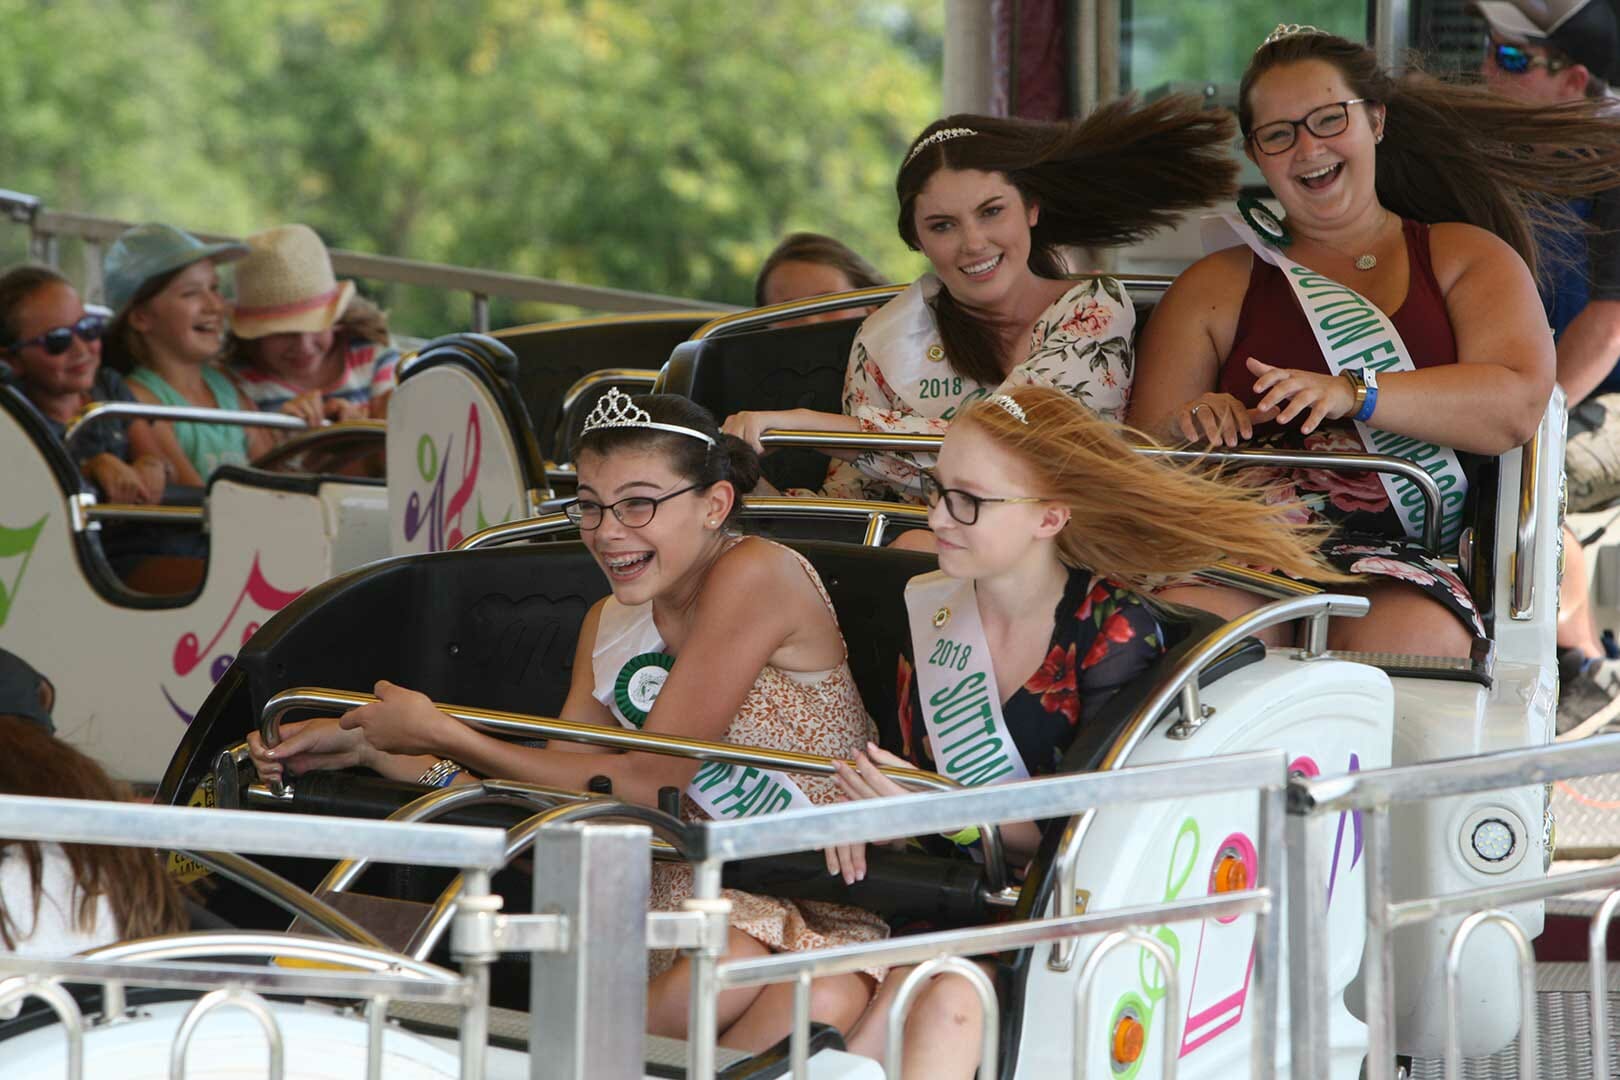 Last chance to ride the rides at Sutton Fair this year.